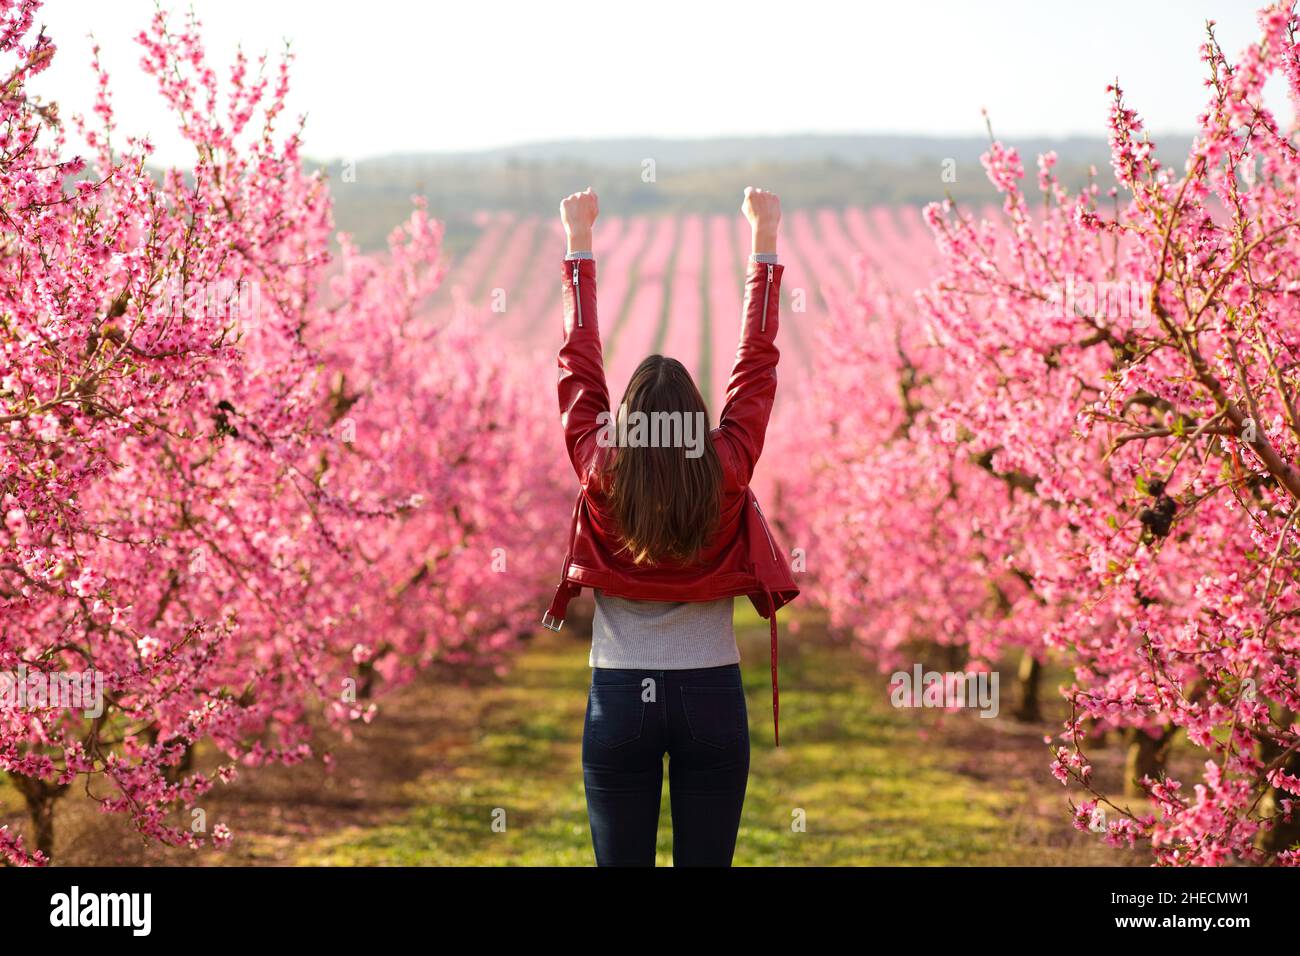 Back view portrait of an excited woman raising arms in a flowered field in spring Stock Photo